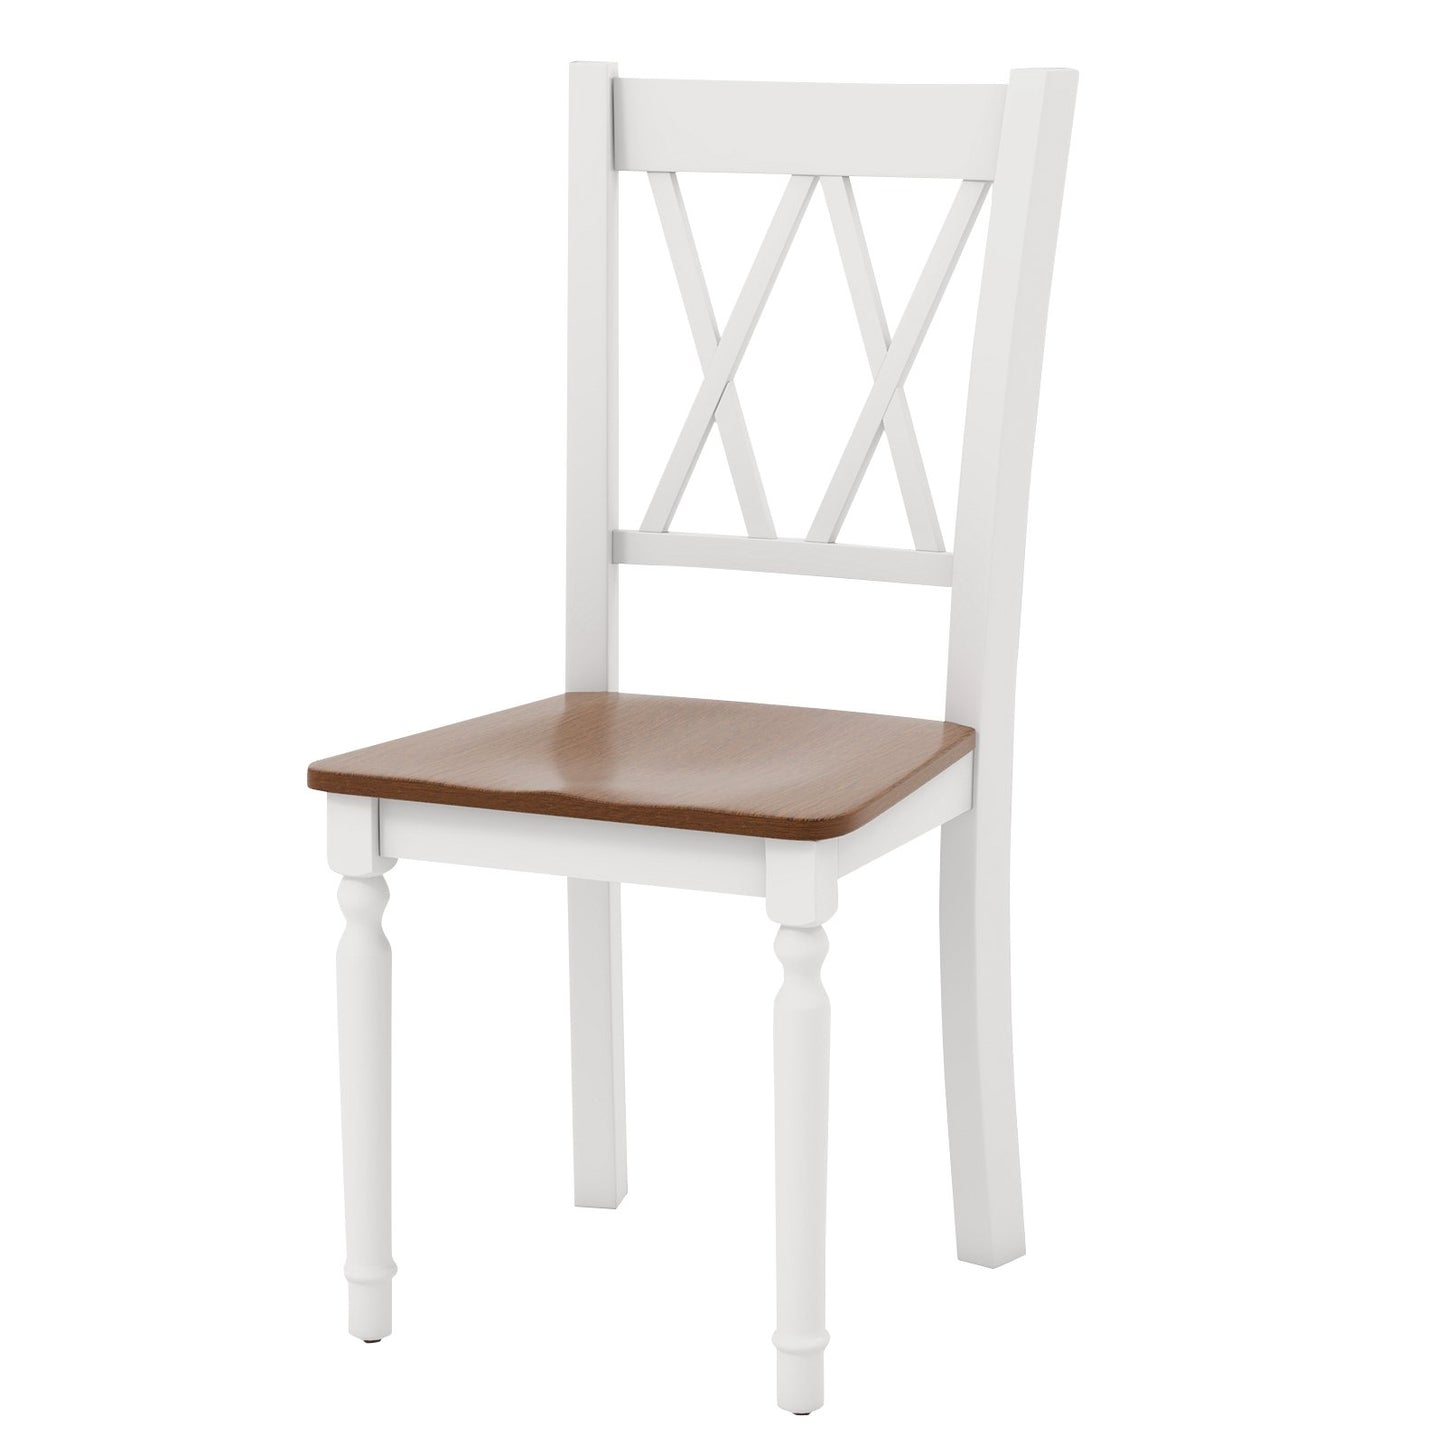 Set of 2 Wooden Farmhouse Kitchen Chairs with Rubber Wood Seat-2 Pieces